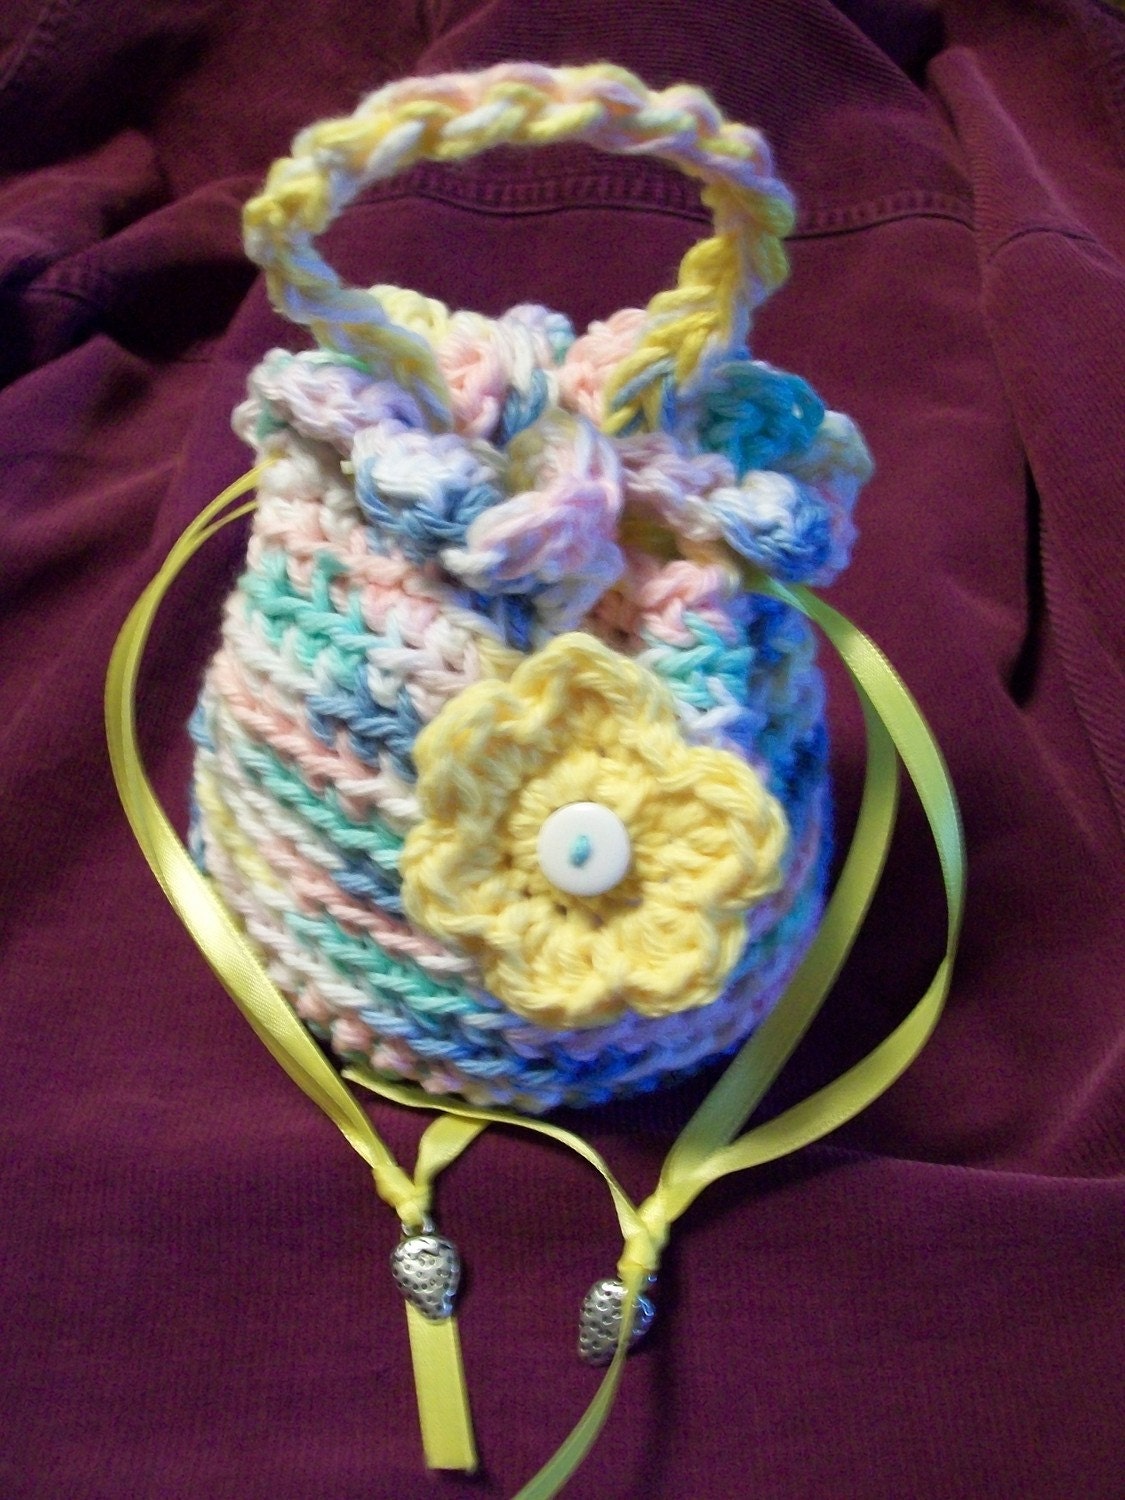 Girl's drawstring crocheted purse in pastel colors with flower.